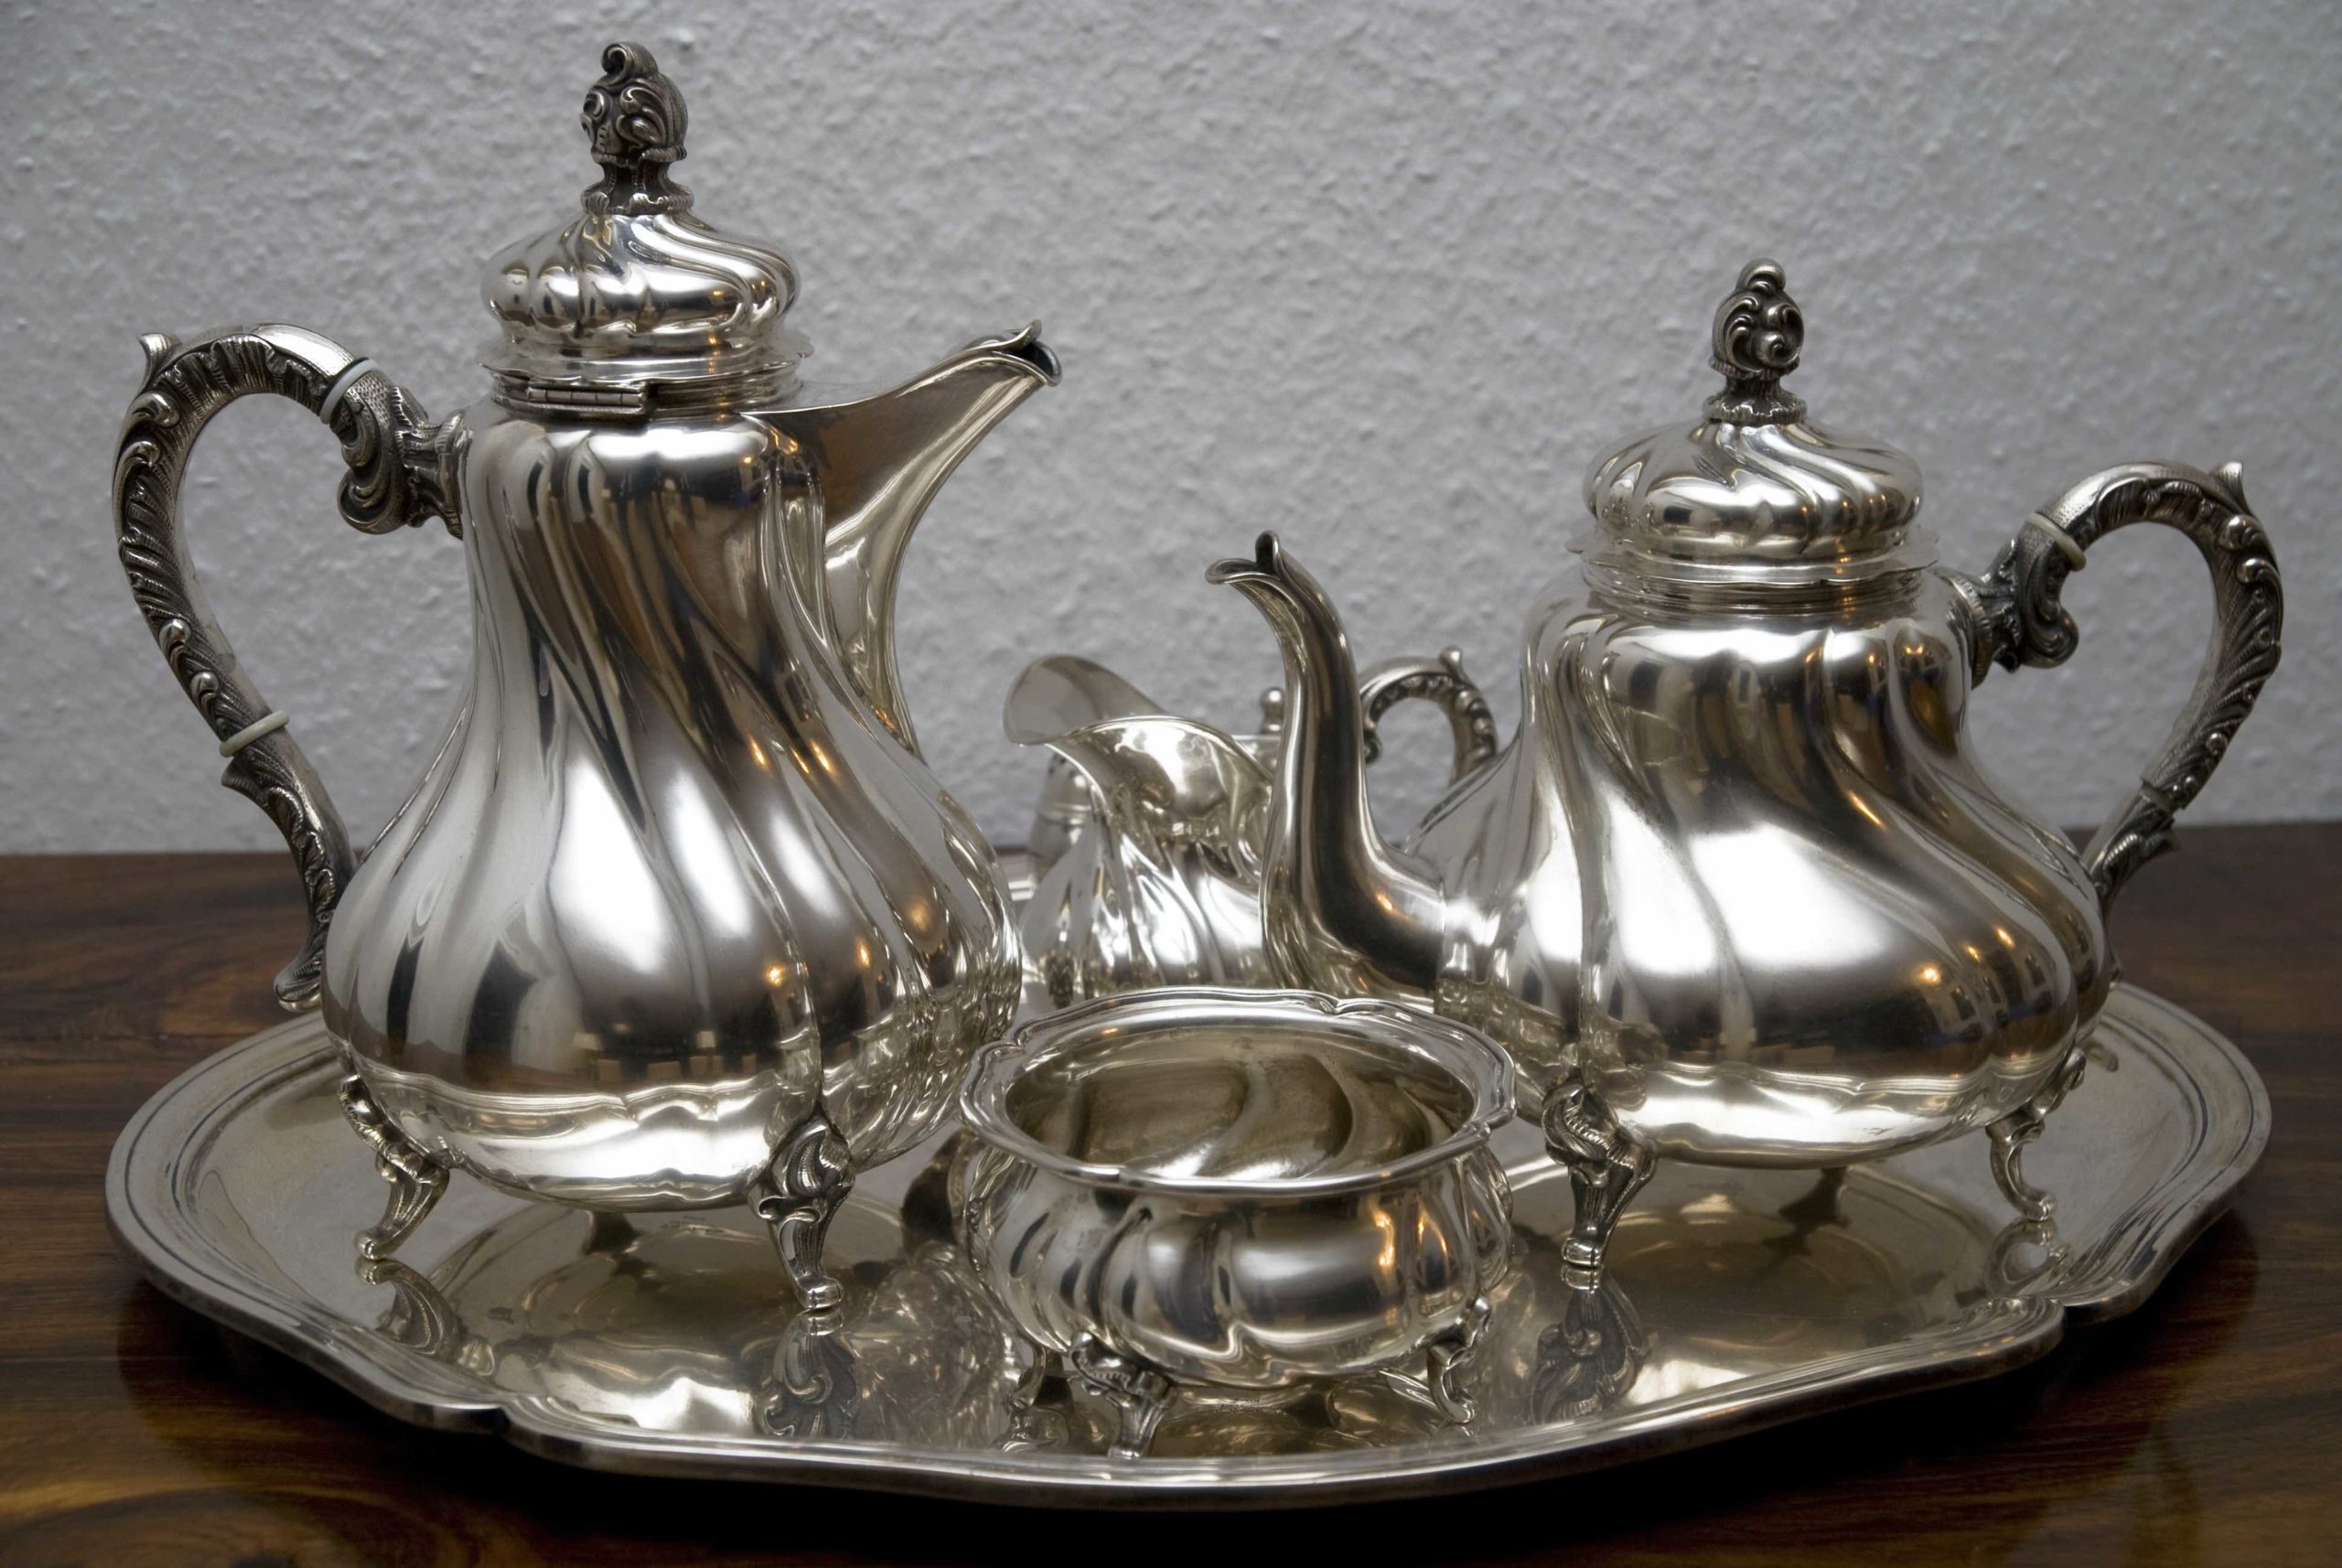 Ready to Sell Your Inherited Silver Items? Here's What to Expect